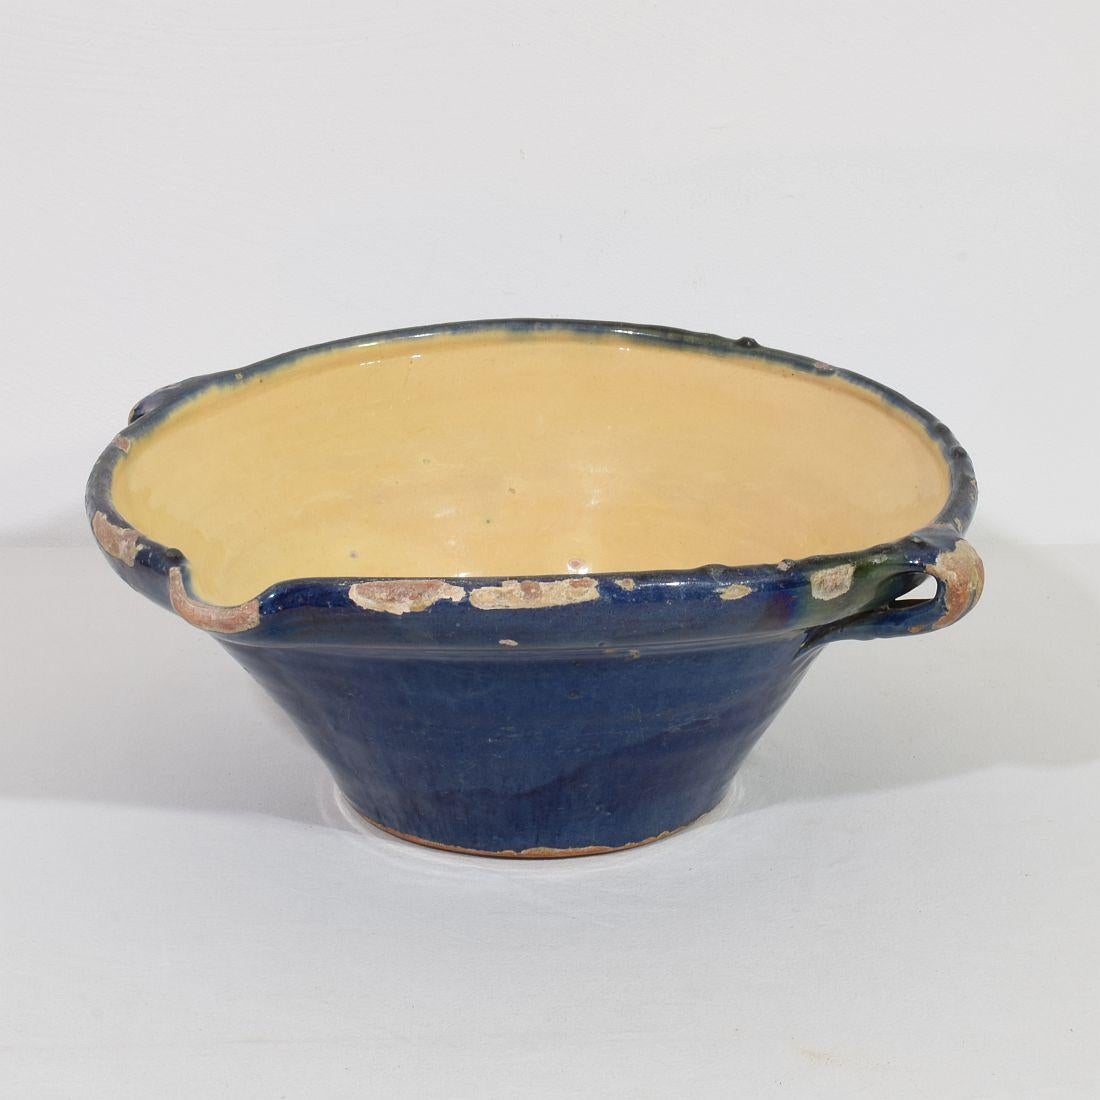 French Provincial 19th Century French Blue Glazed Terracotta Dairy Bowl or Tian For Sale